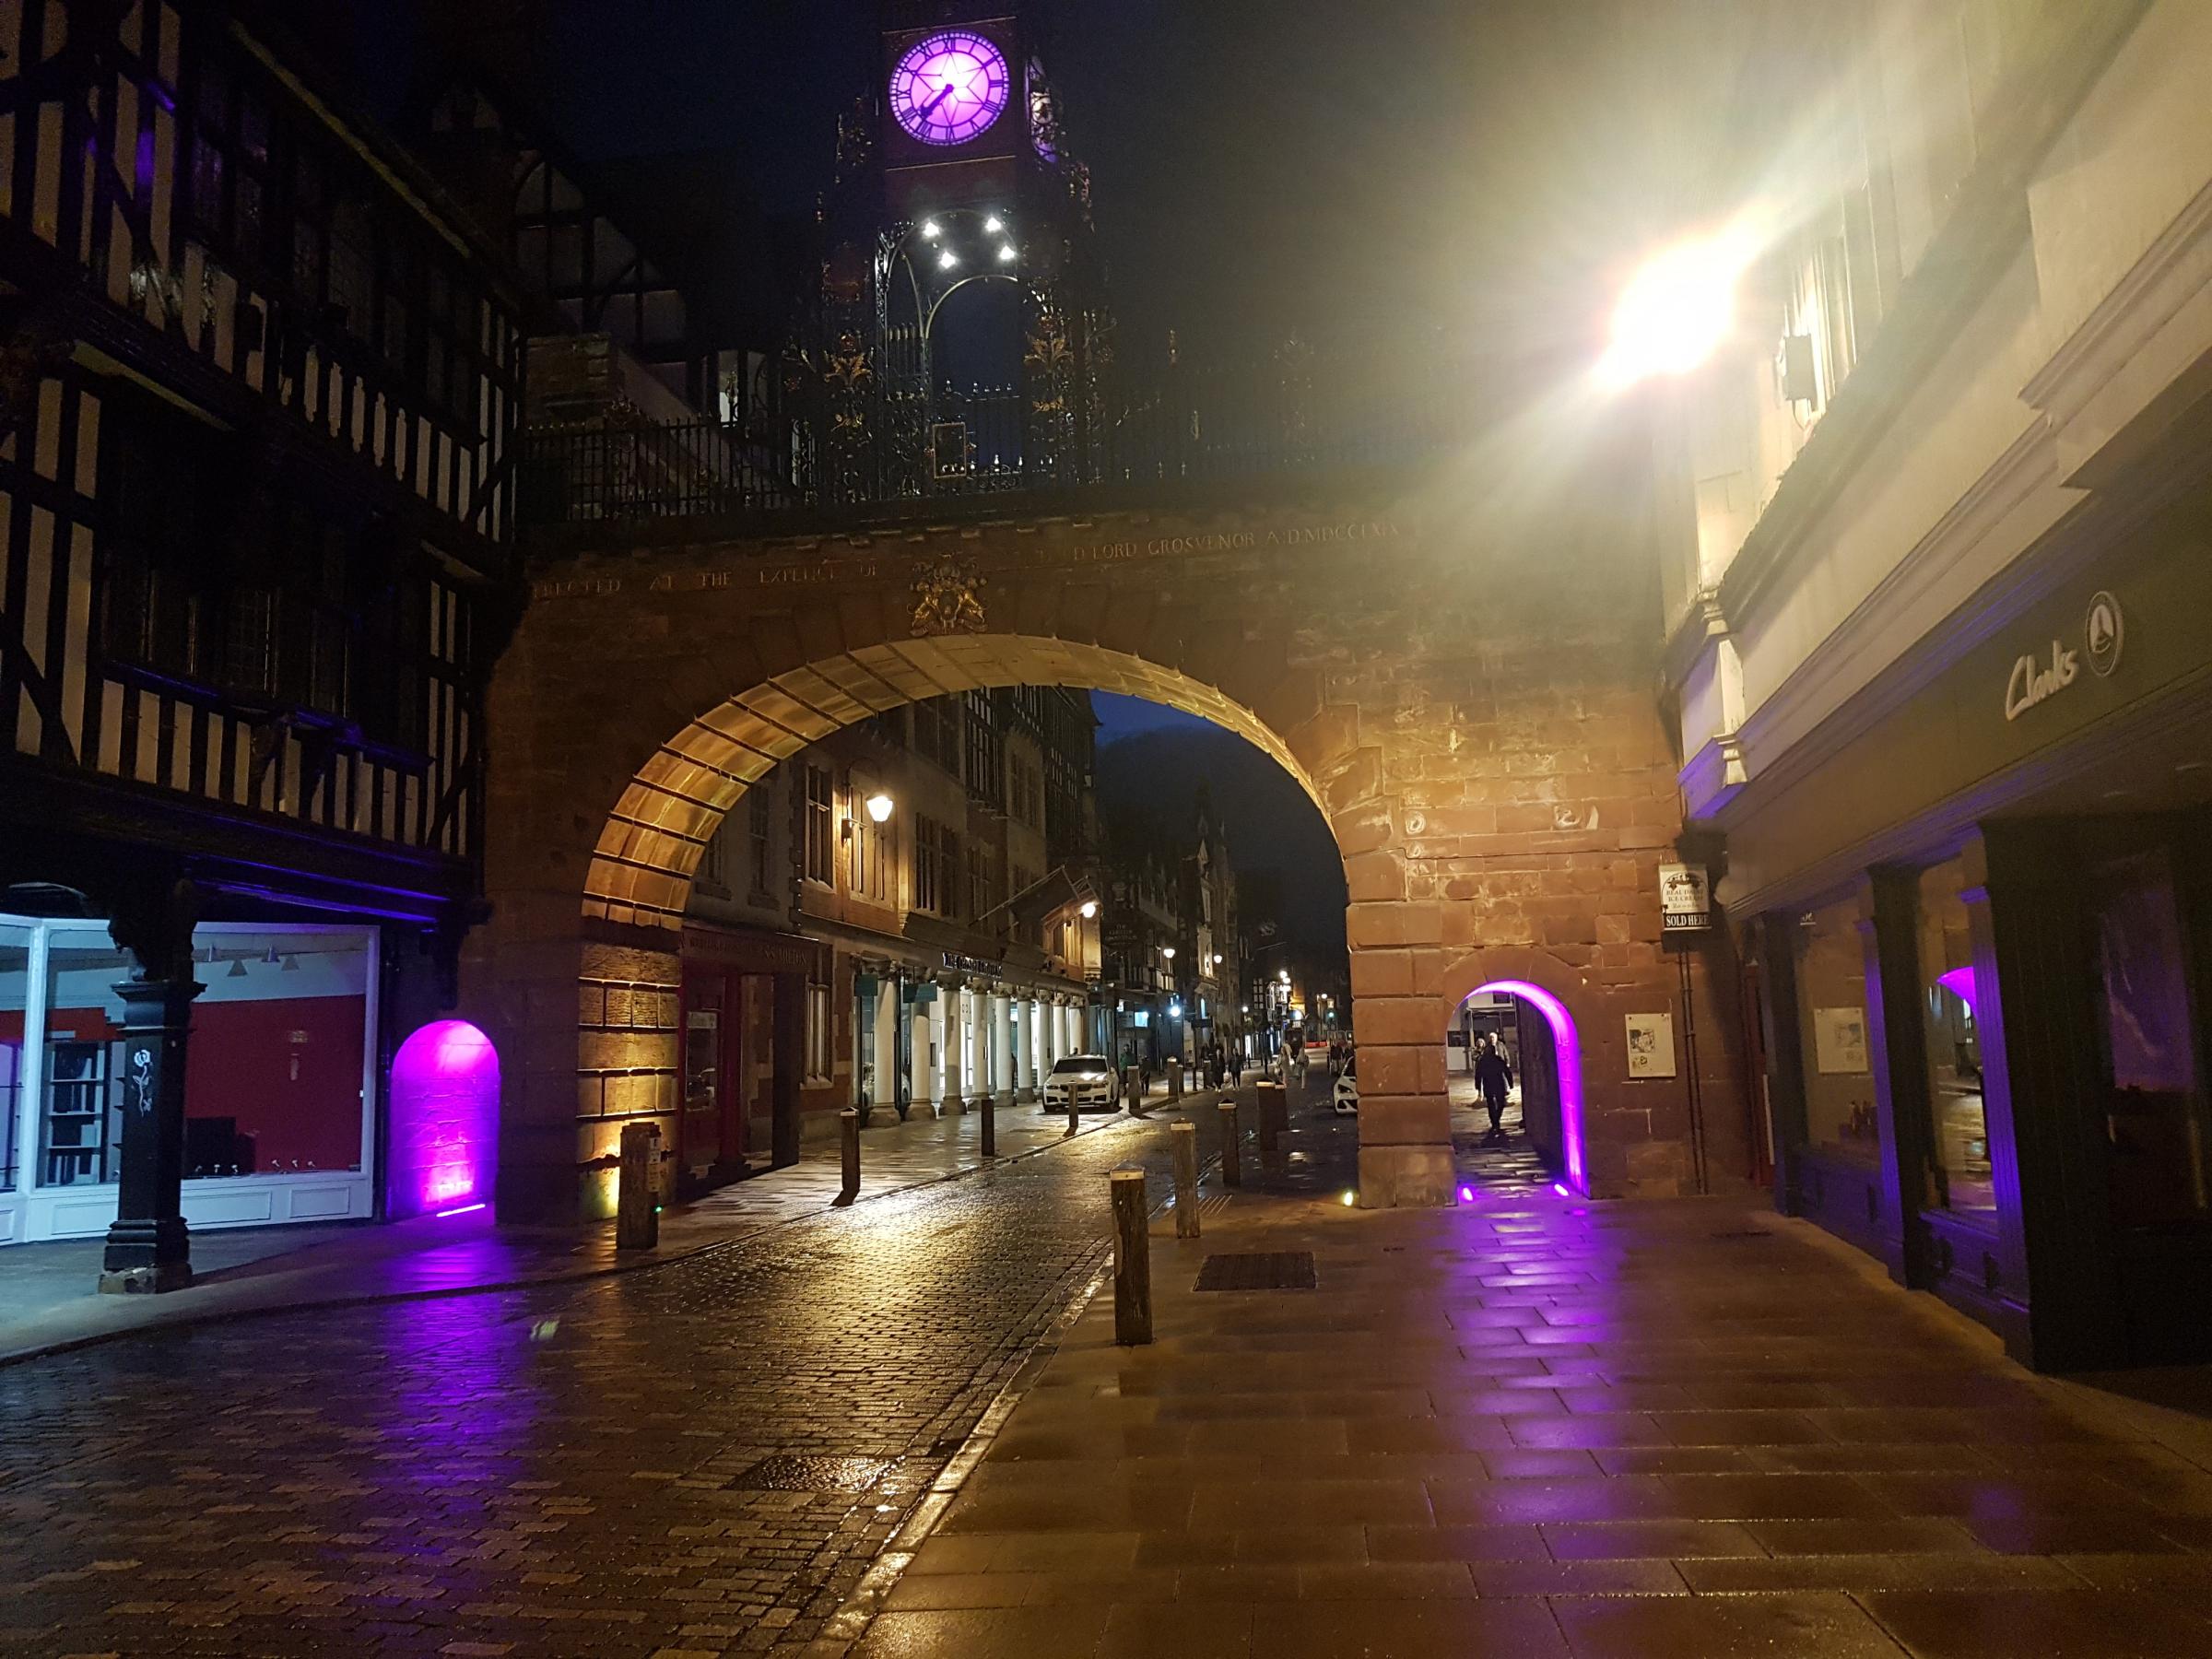 The Eastgate Clock will be lit purple.